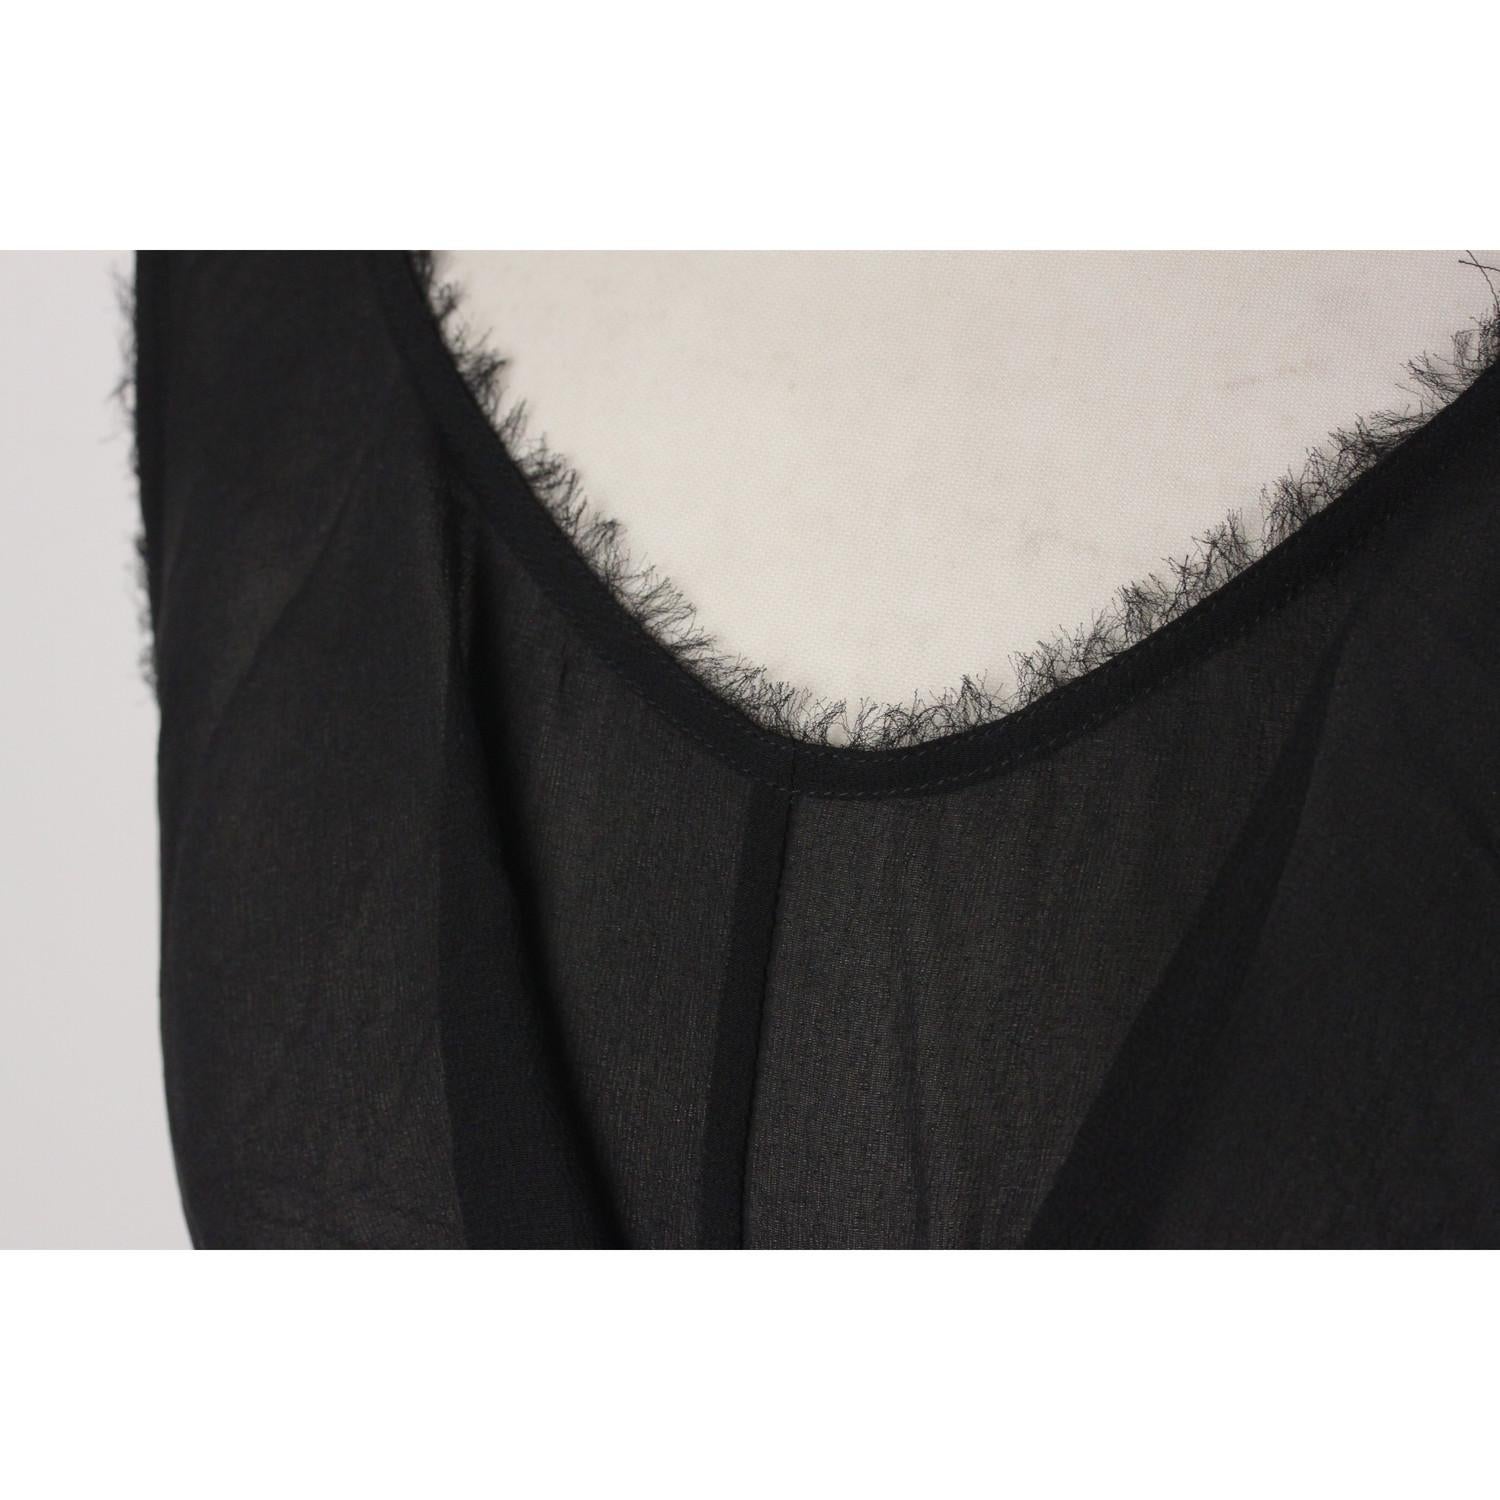 - Fendi Black Silk Sleeveless Dress with Blue Belt
- Sleeveless styling
- Scoop neckline with frills detailing
- Long removable blue belt at the waist
- Frayed edges
- Color block design
- Composition: 100% silk
- Zip closure to the back
- Size: 44